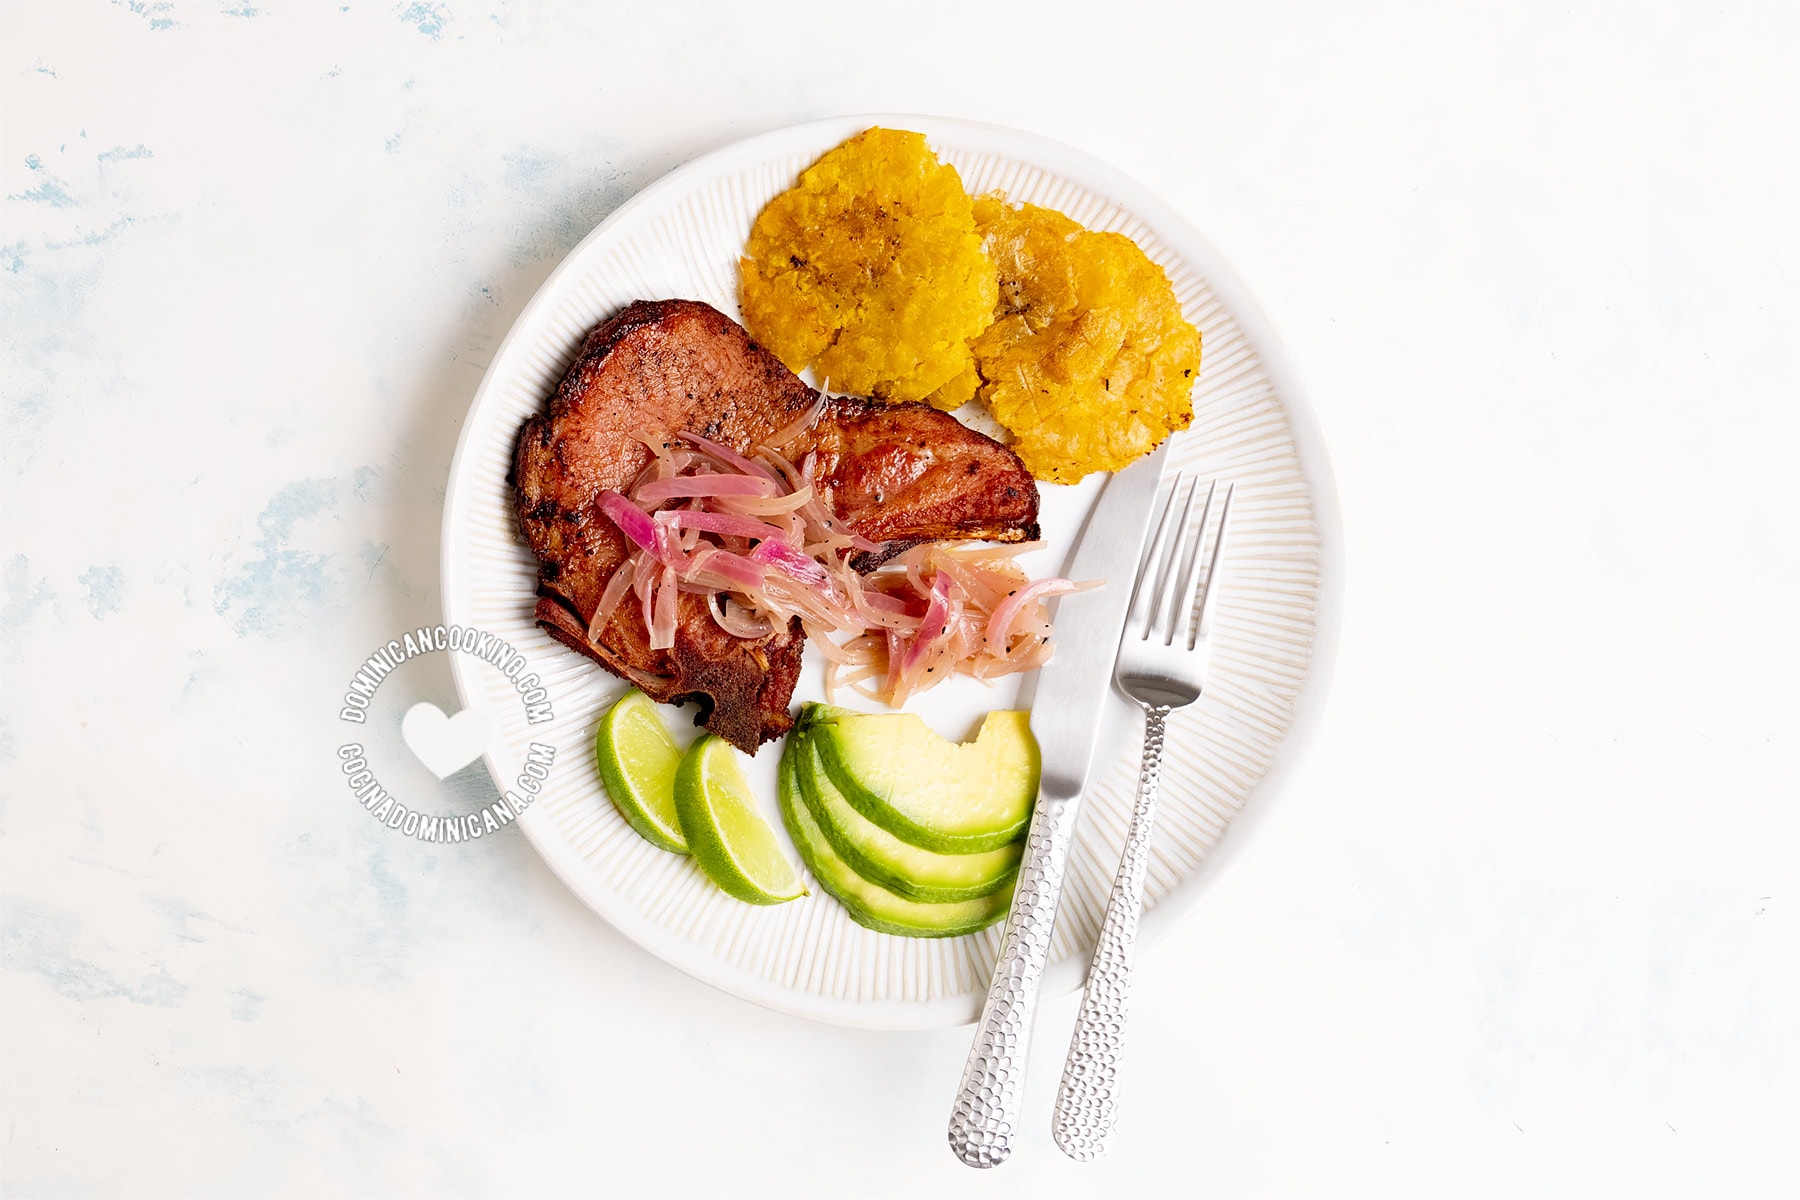 Chuletas Fritas (Dominican Fried Smoked Pork Chops) with Tostones and Avocado